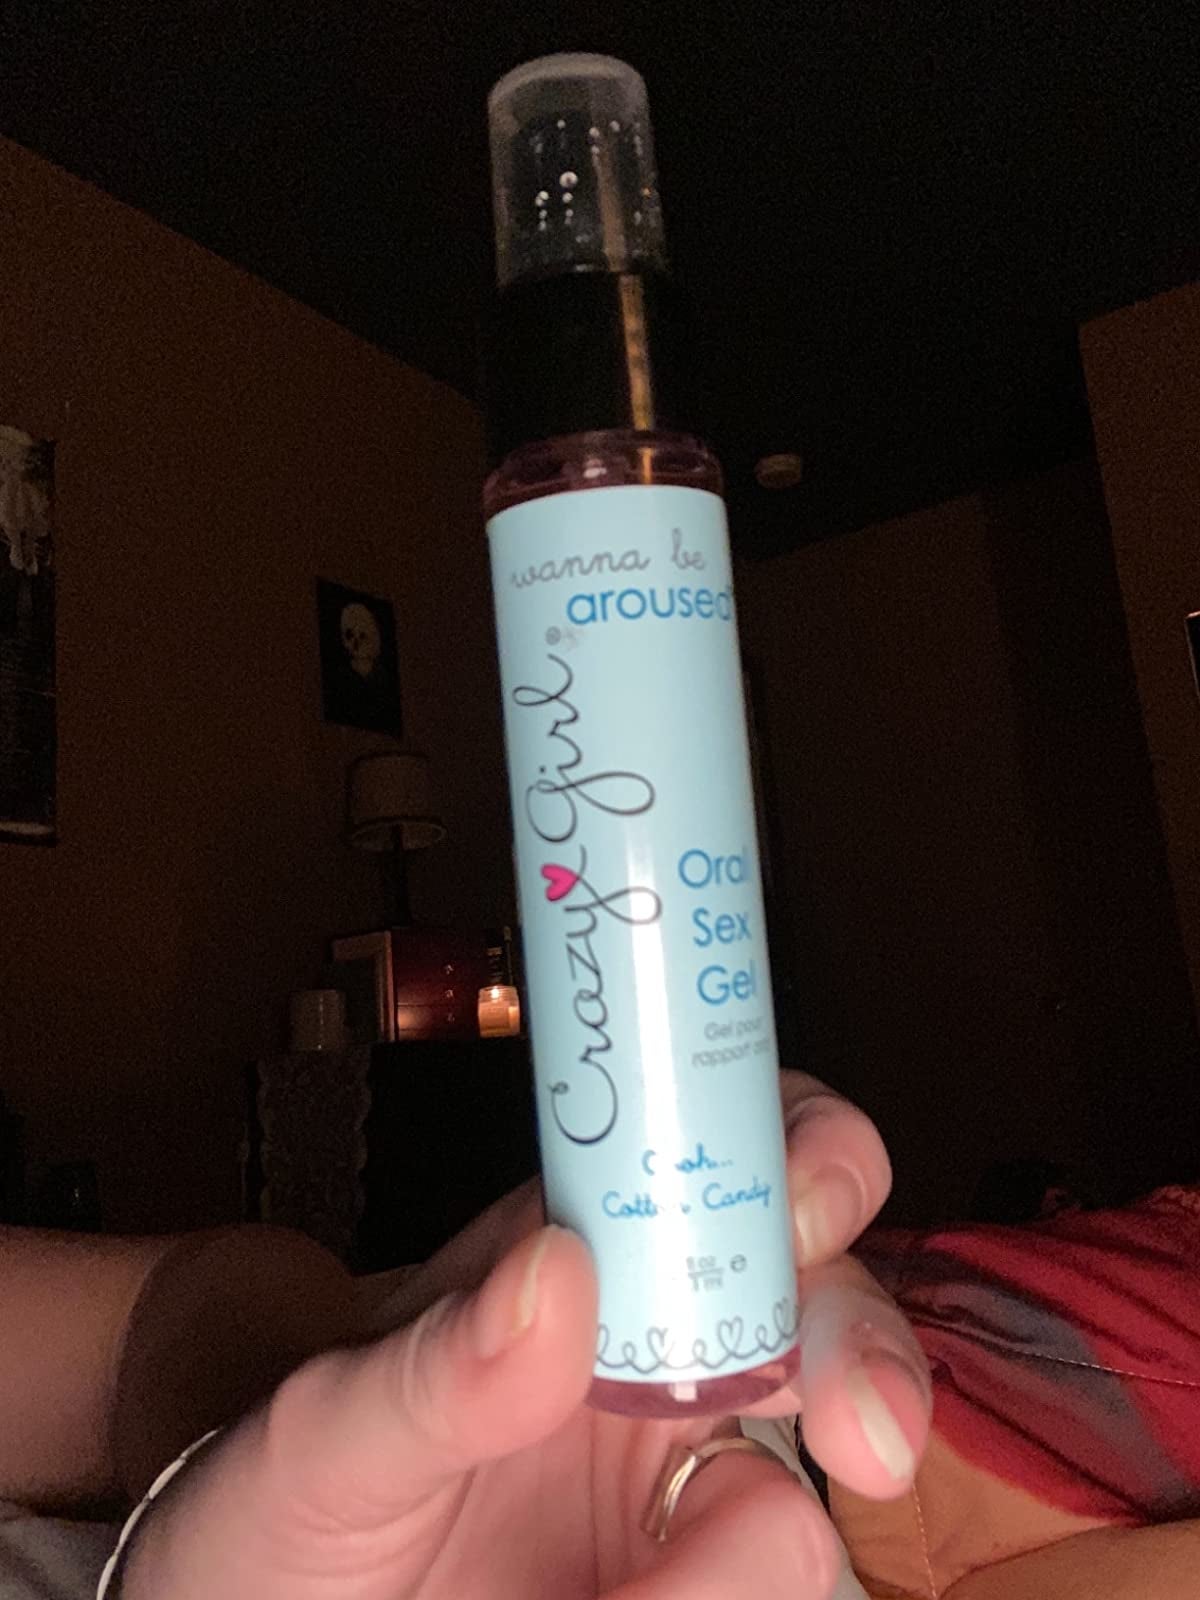 Reviewer holding bottle of cotton candy oral sex gel